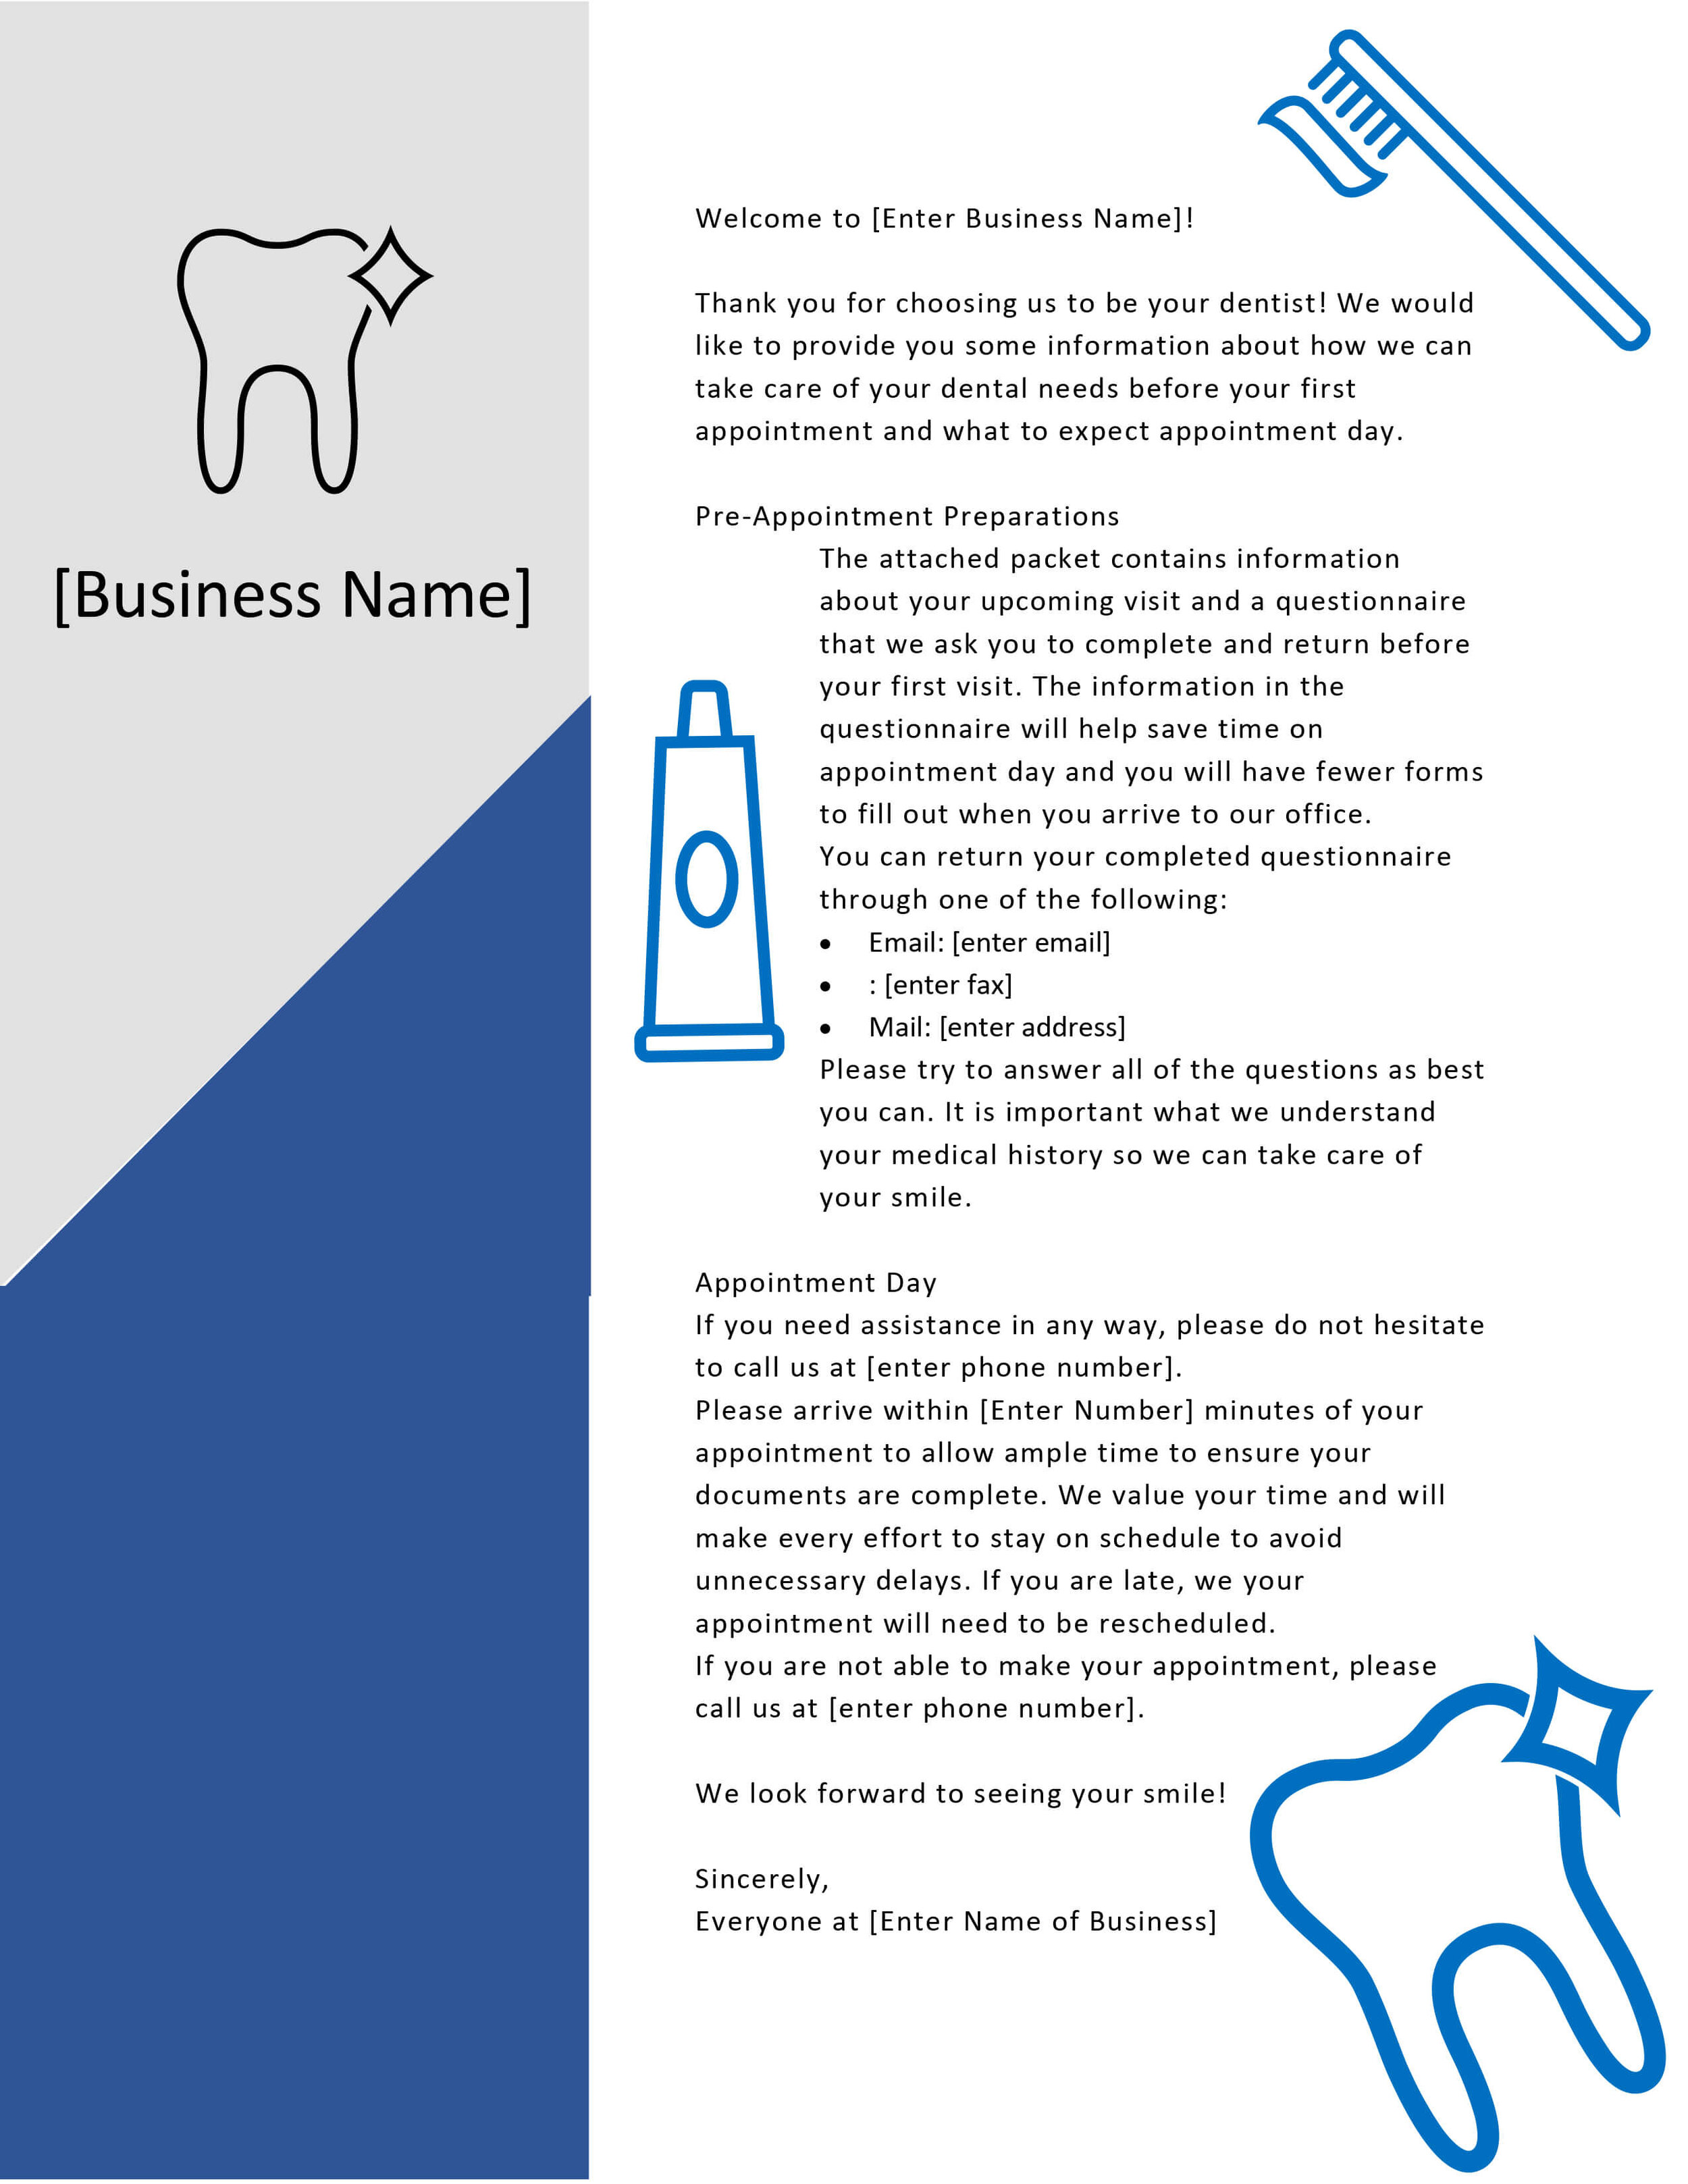 5 New Patient Welcome Letter Templates for Dentists-4.jpg